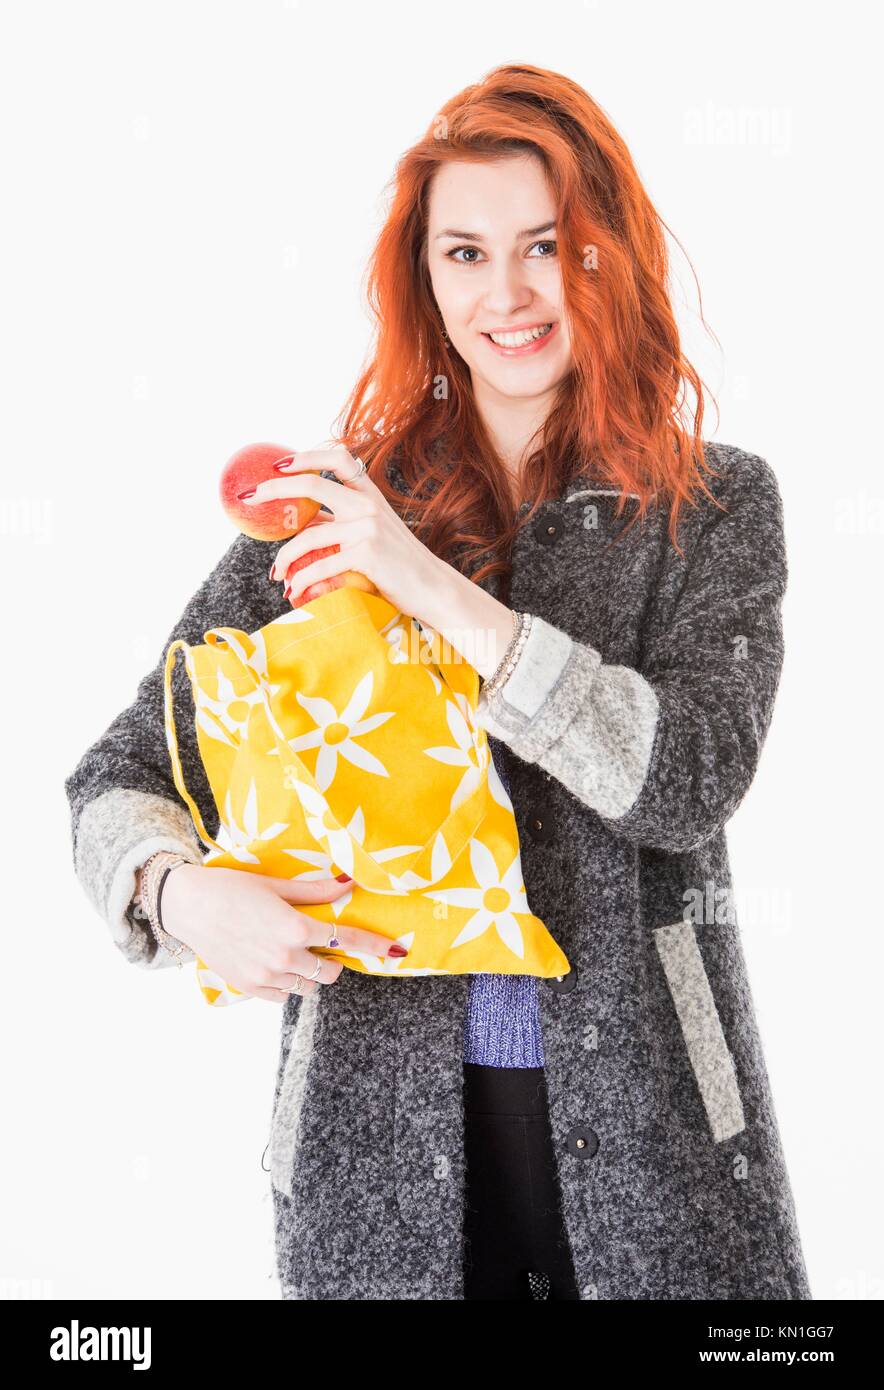 Cheerful young woman putting apples in reusable eco friendly shopping bag. Stock Photo